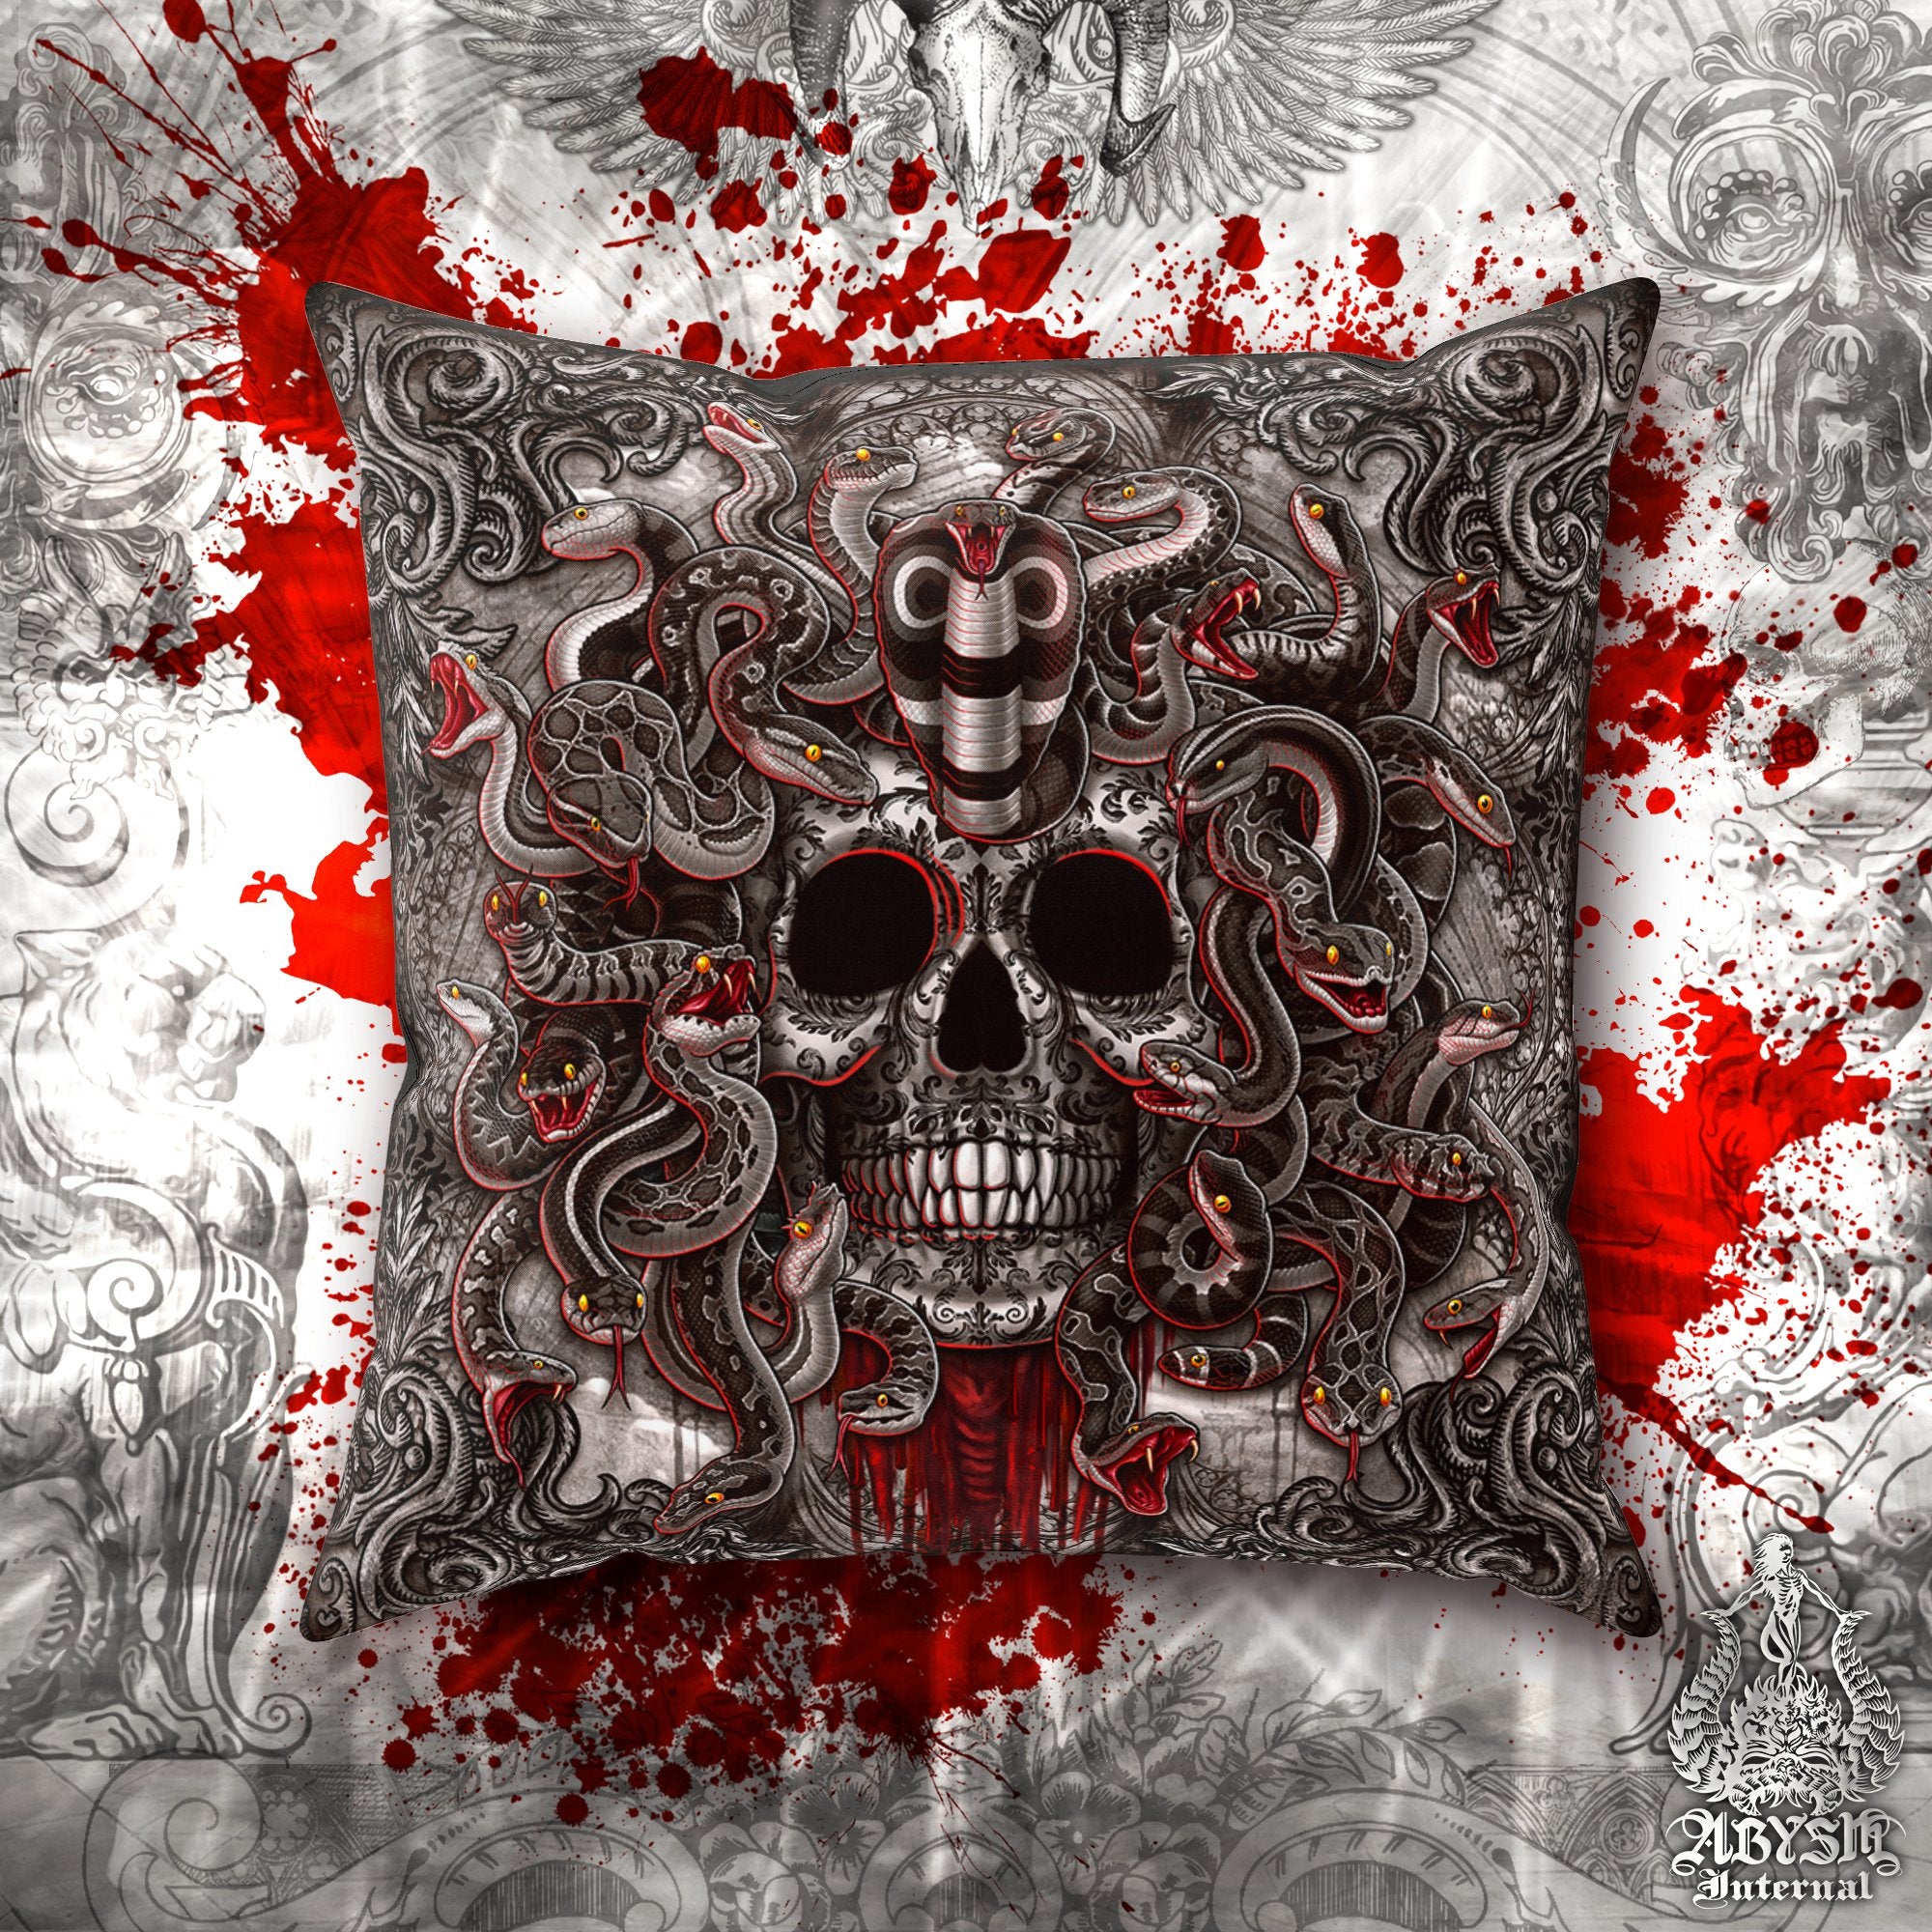 Halloween Throw Pillow, Decorative Accent Pillow, Square Cushion Cover, Gothic Medusa, Skull Art, Horror Room Decor, Alternative Home - Grey Snakes, 4 Faces - Abysm Internal